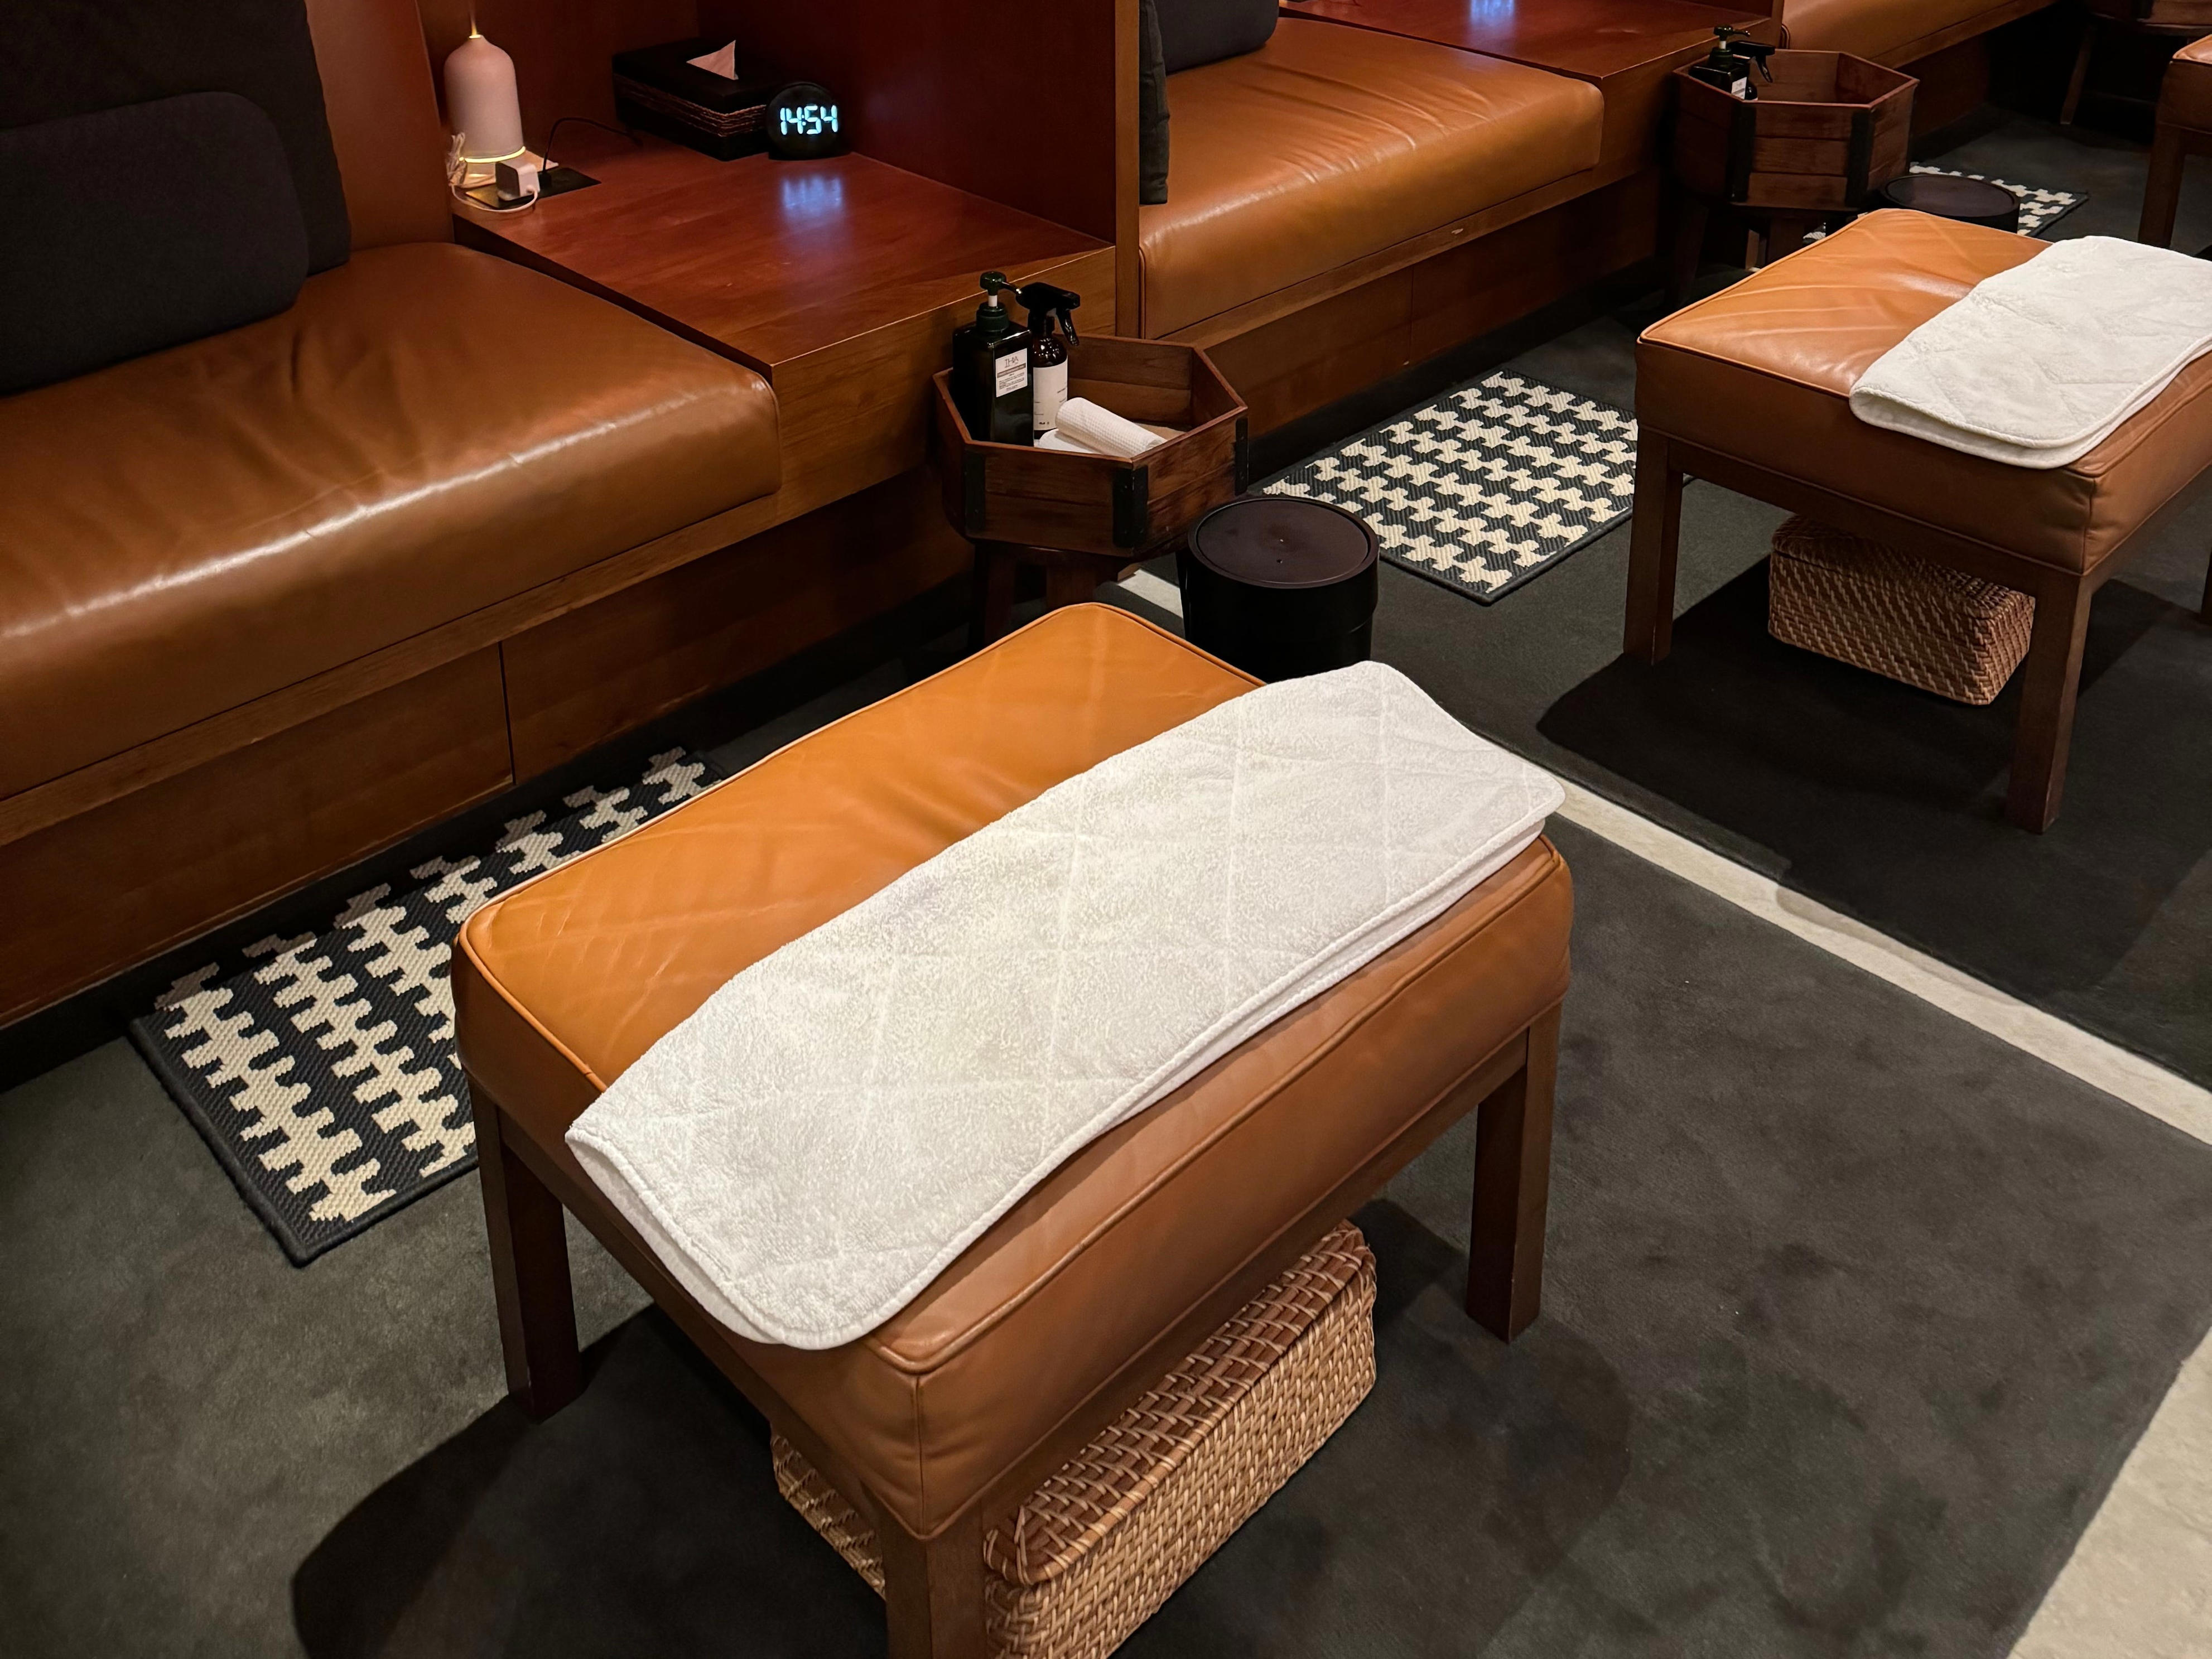 <p>The massage space was dimly lit and quiet. If time slots were available, I could reserve a complimentary foot massage, neck/back massage, or head massage in 15-minute increments with a masseuse. </p>